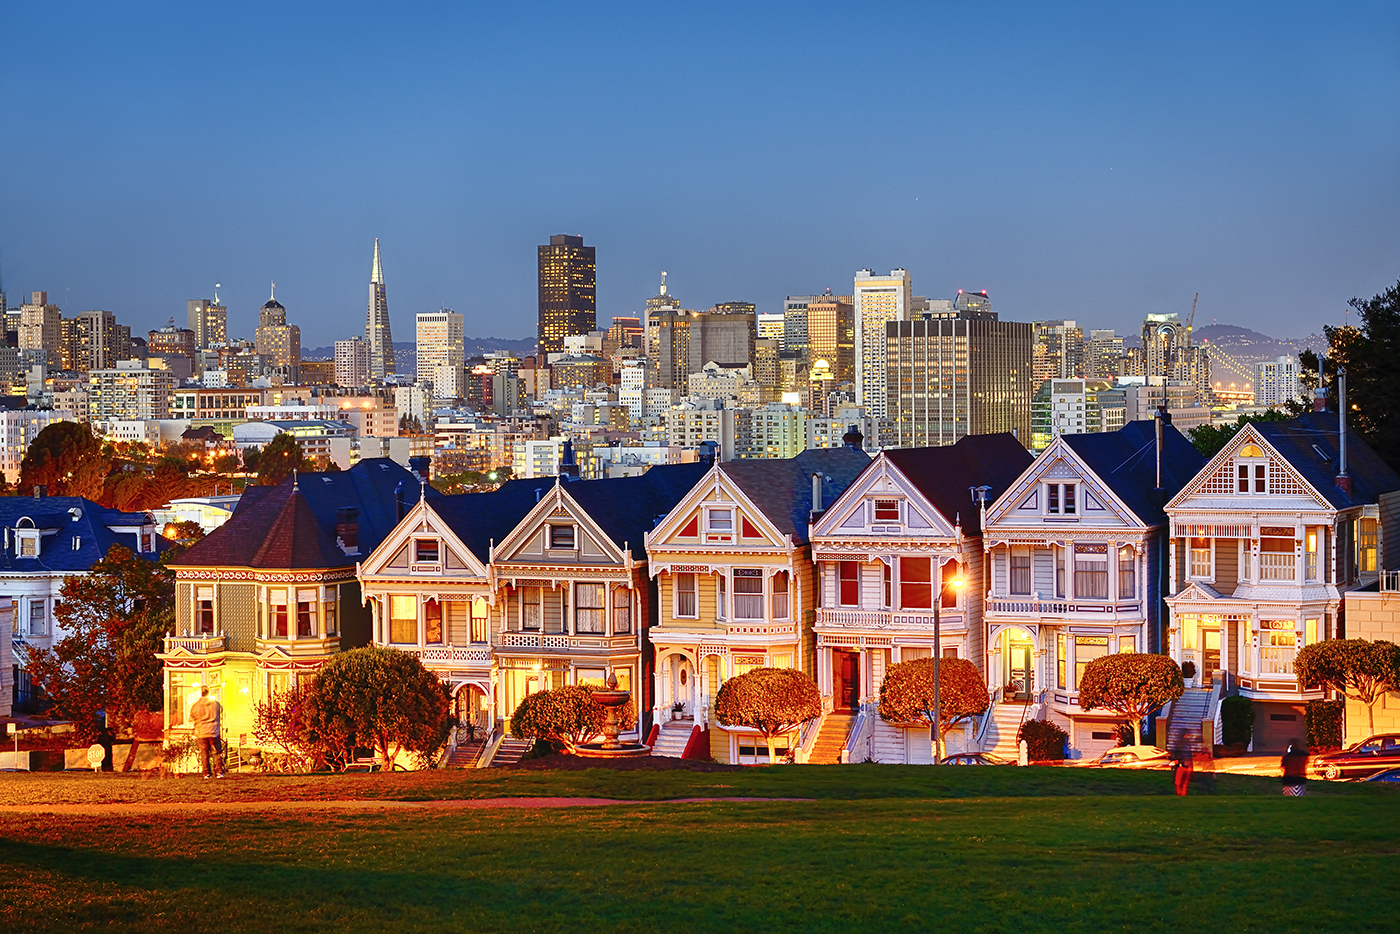 The Painted Ladies of San Francisco, California.